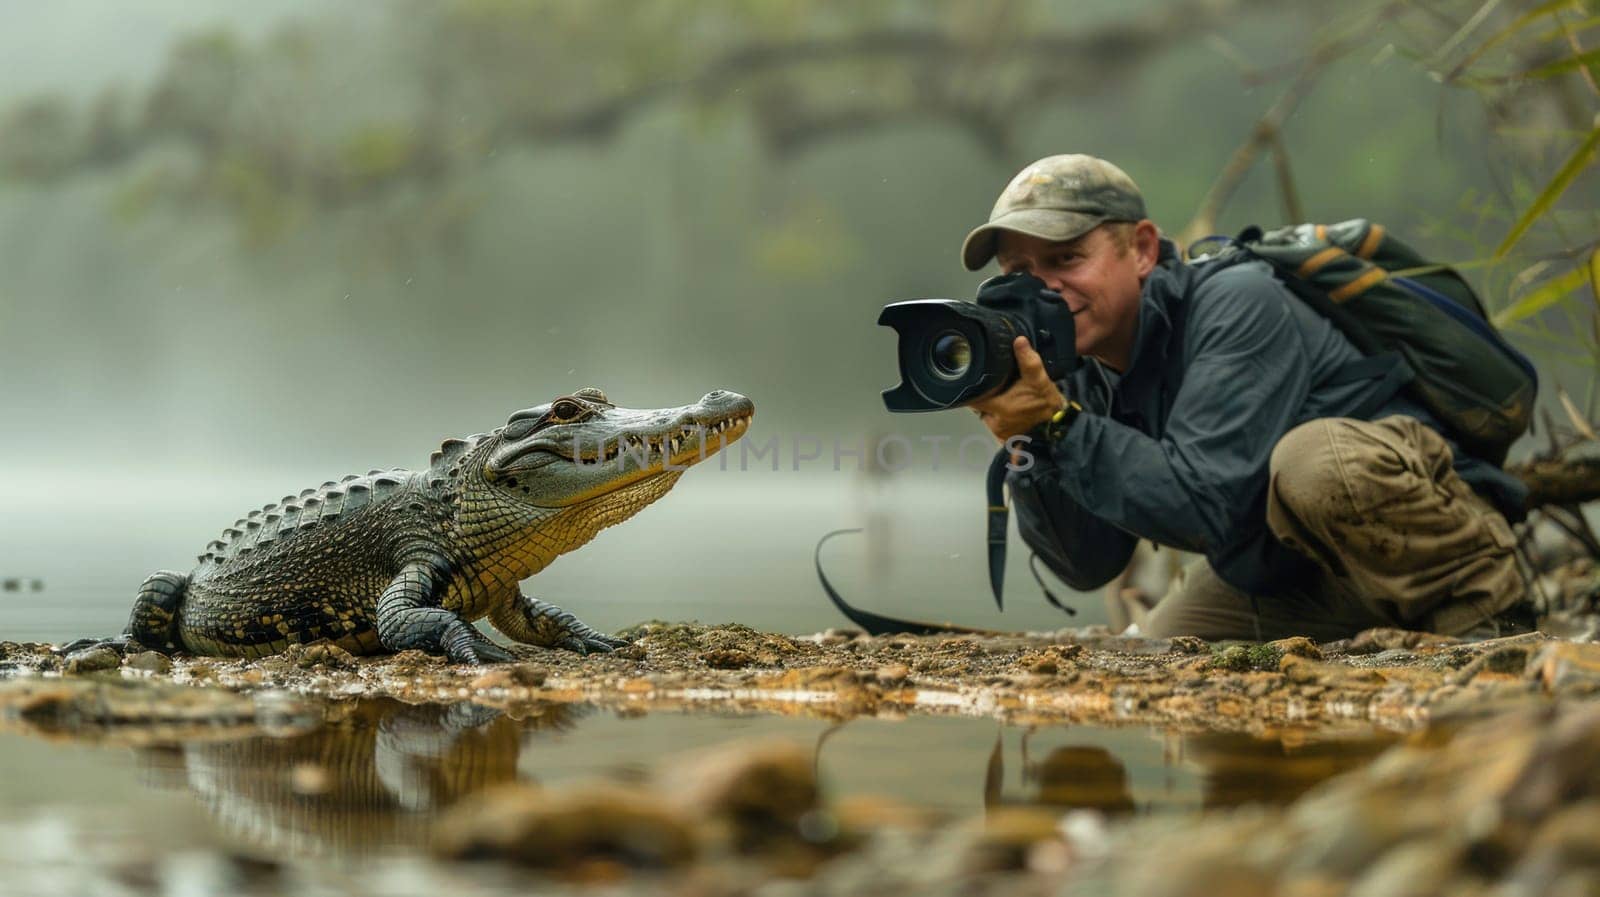 Man in Prone Position Holding Digital Camera Facing Viewer Focused on Young Crocodile at Lake Concept Misty Greenery and Wet Rock Terrain Background.